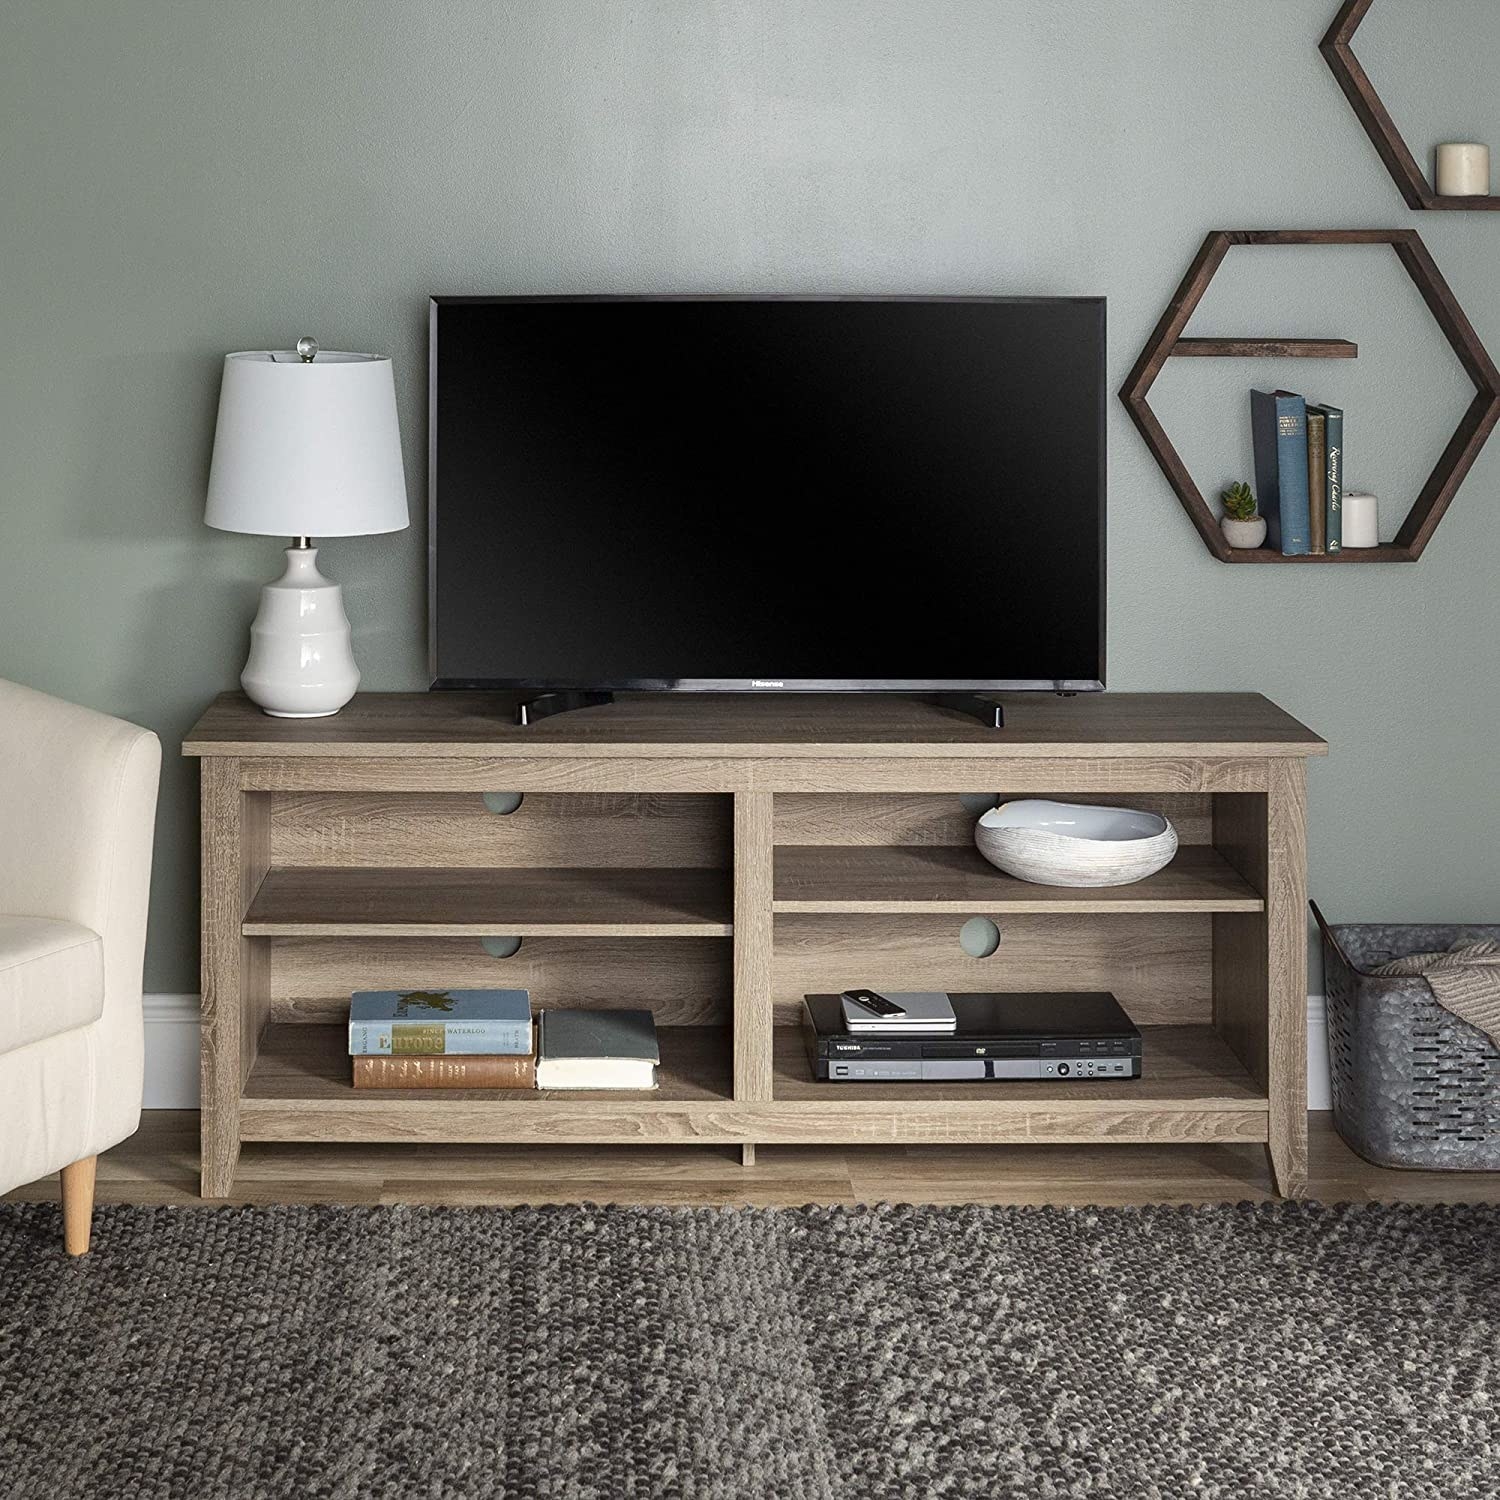 The farmhouse wood TV stand with four shelves